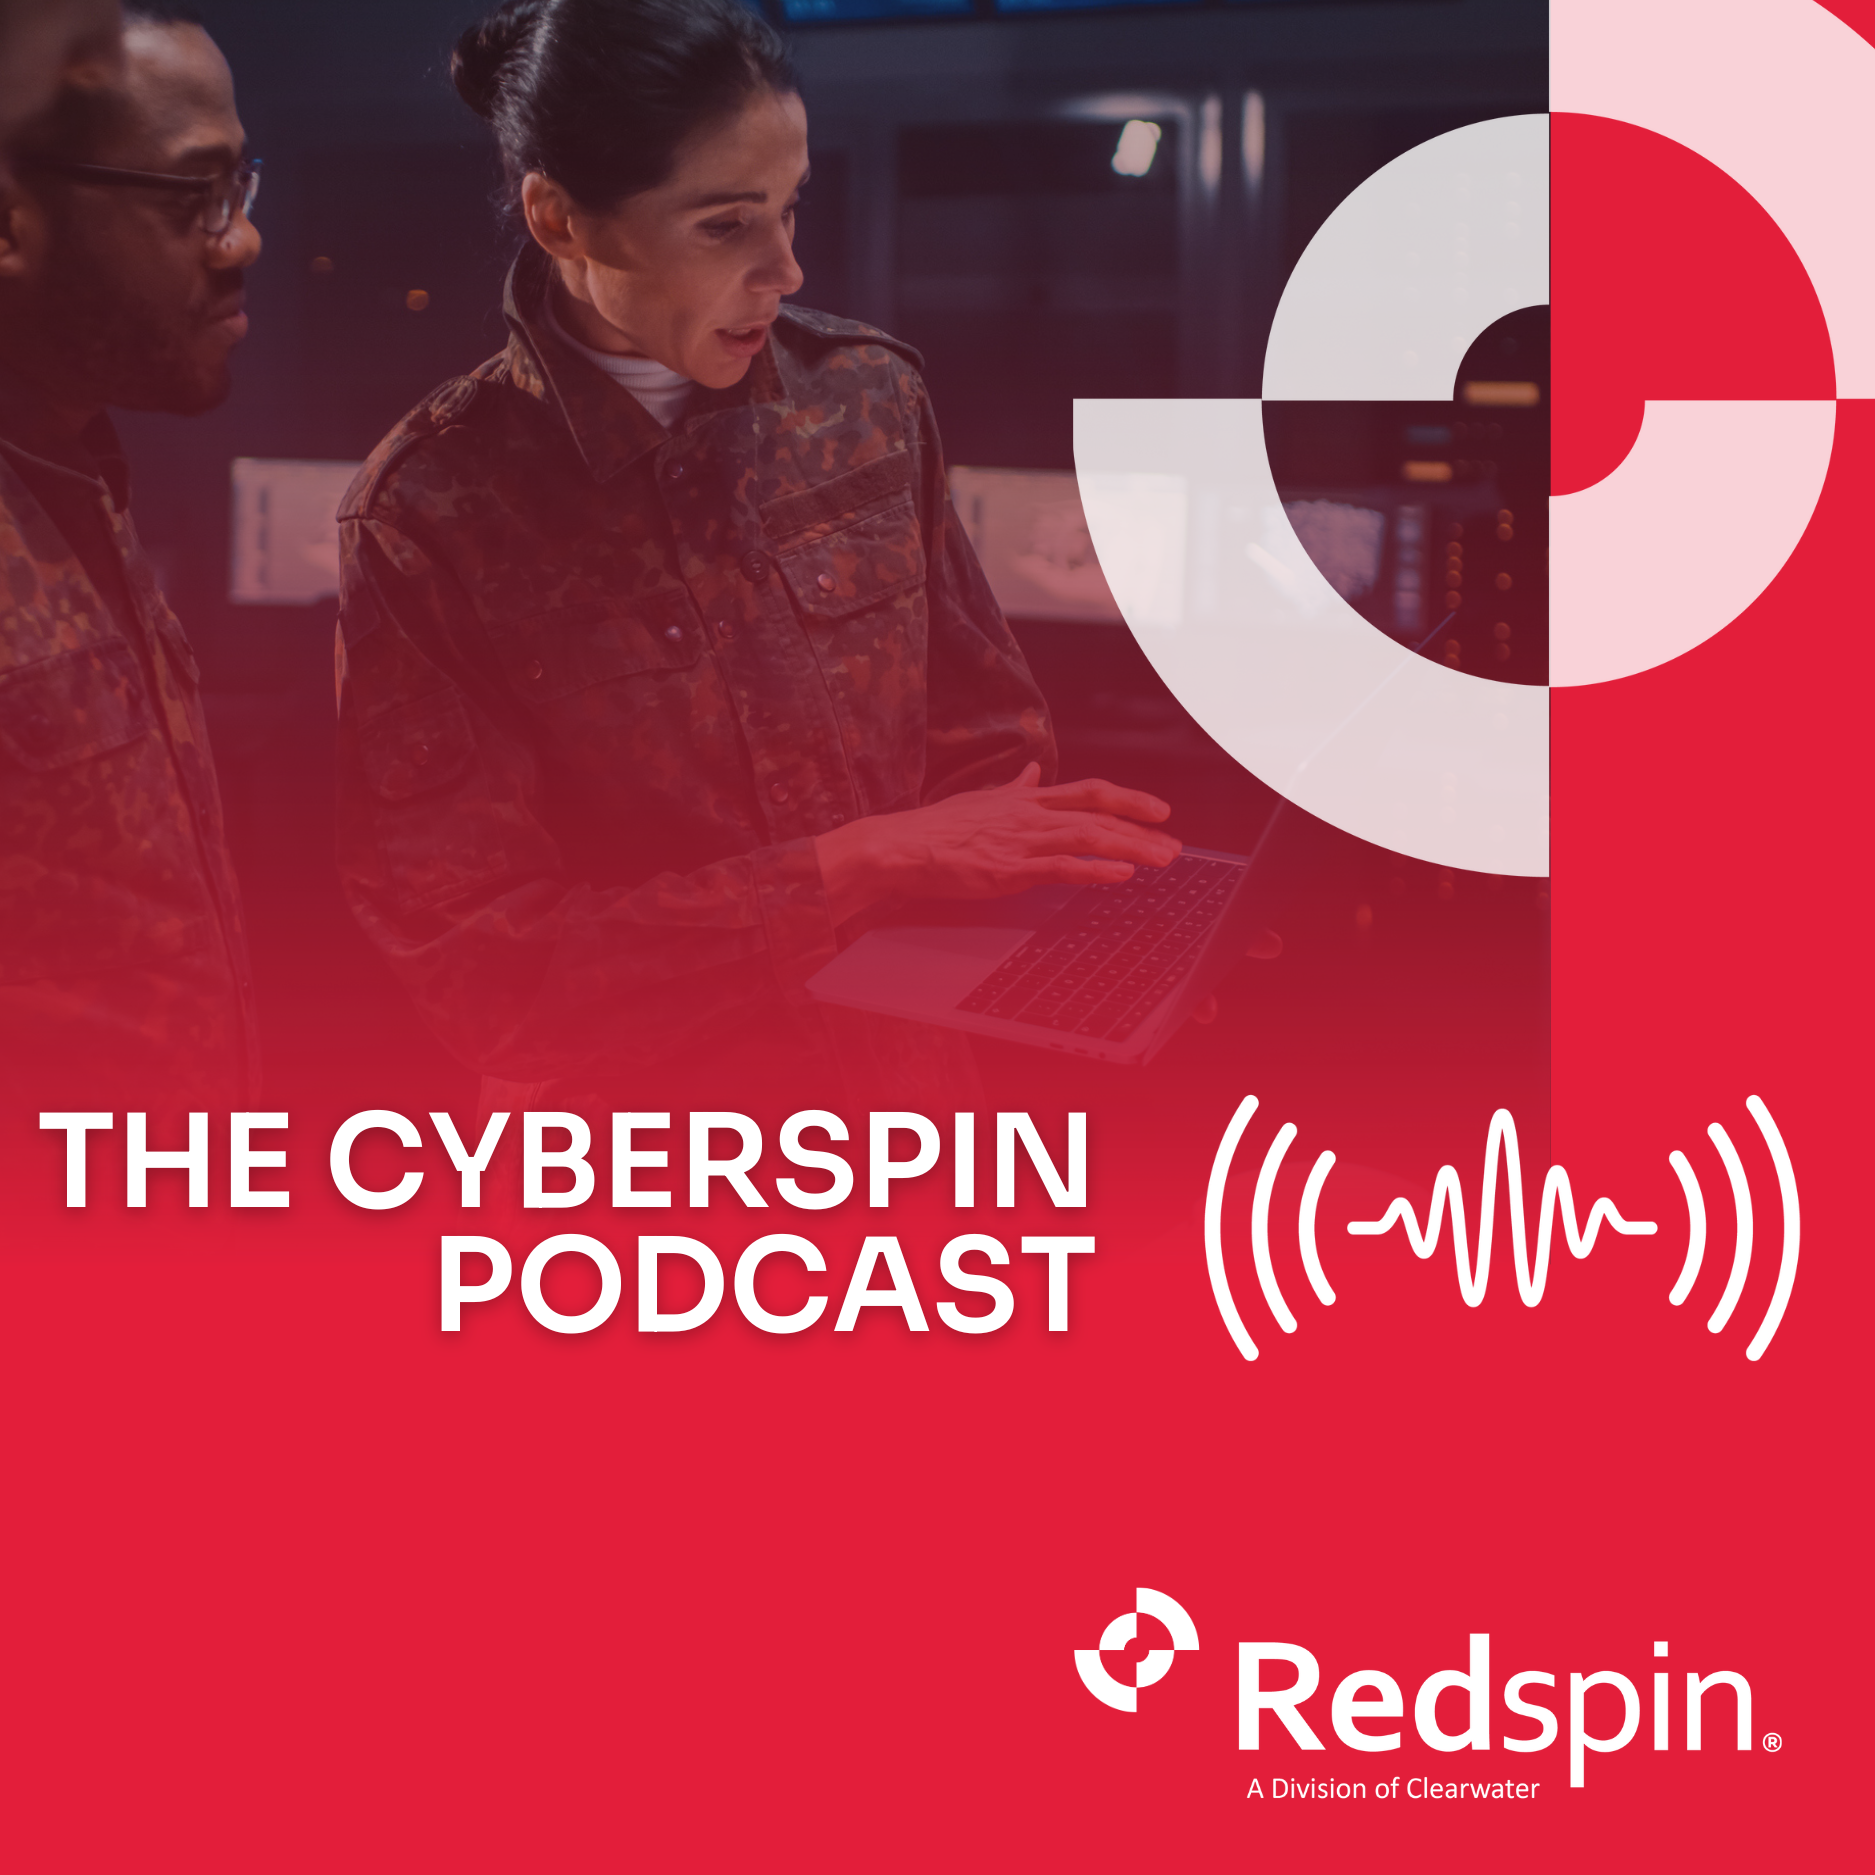 The Cyberspin Podcast